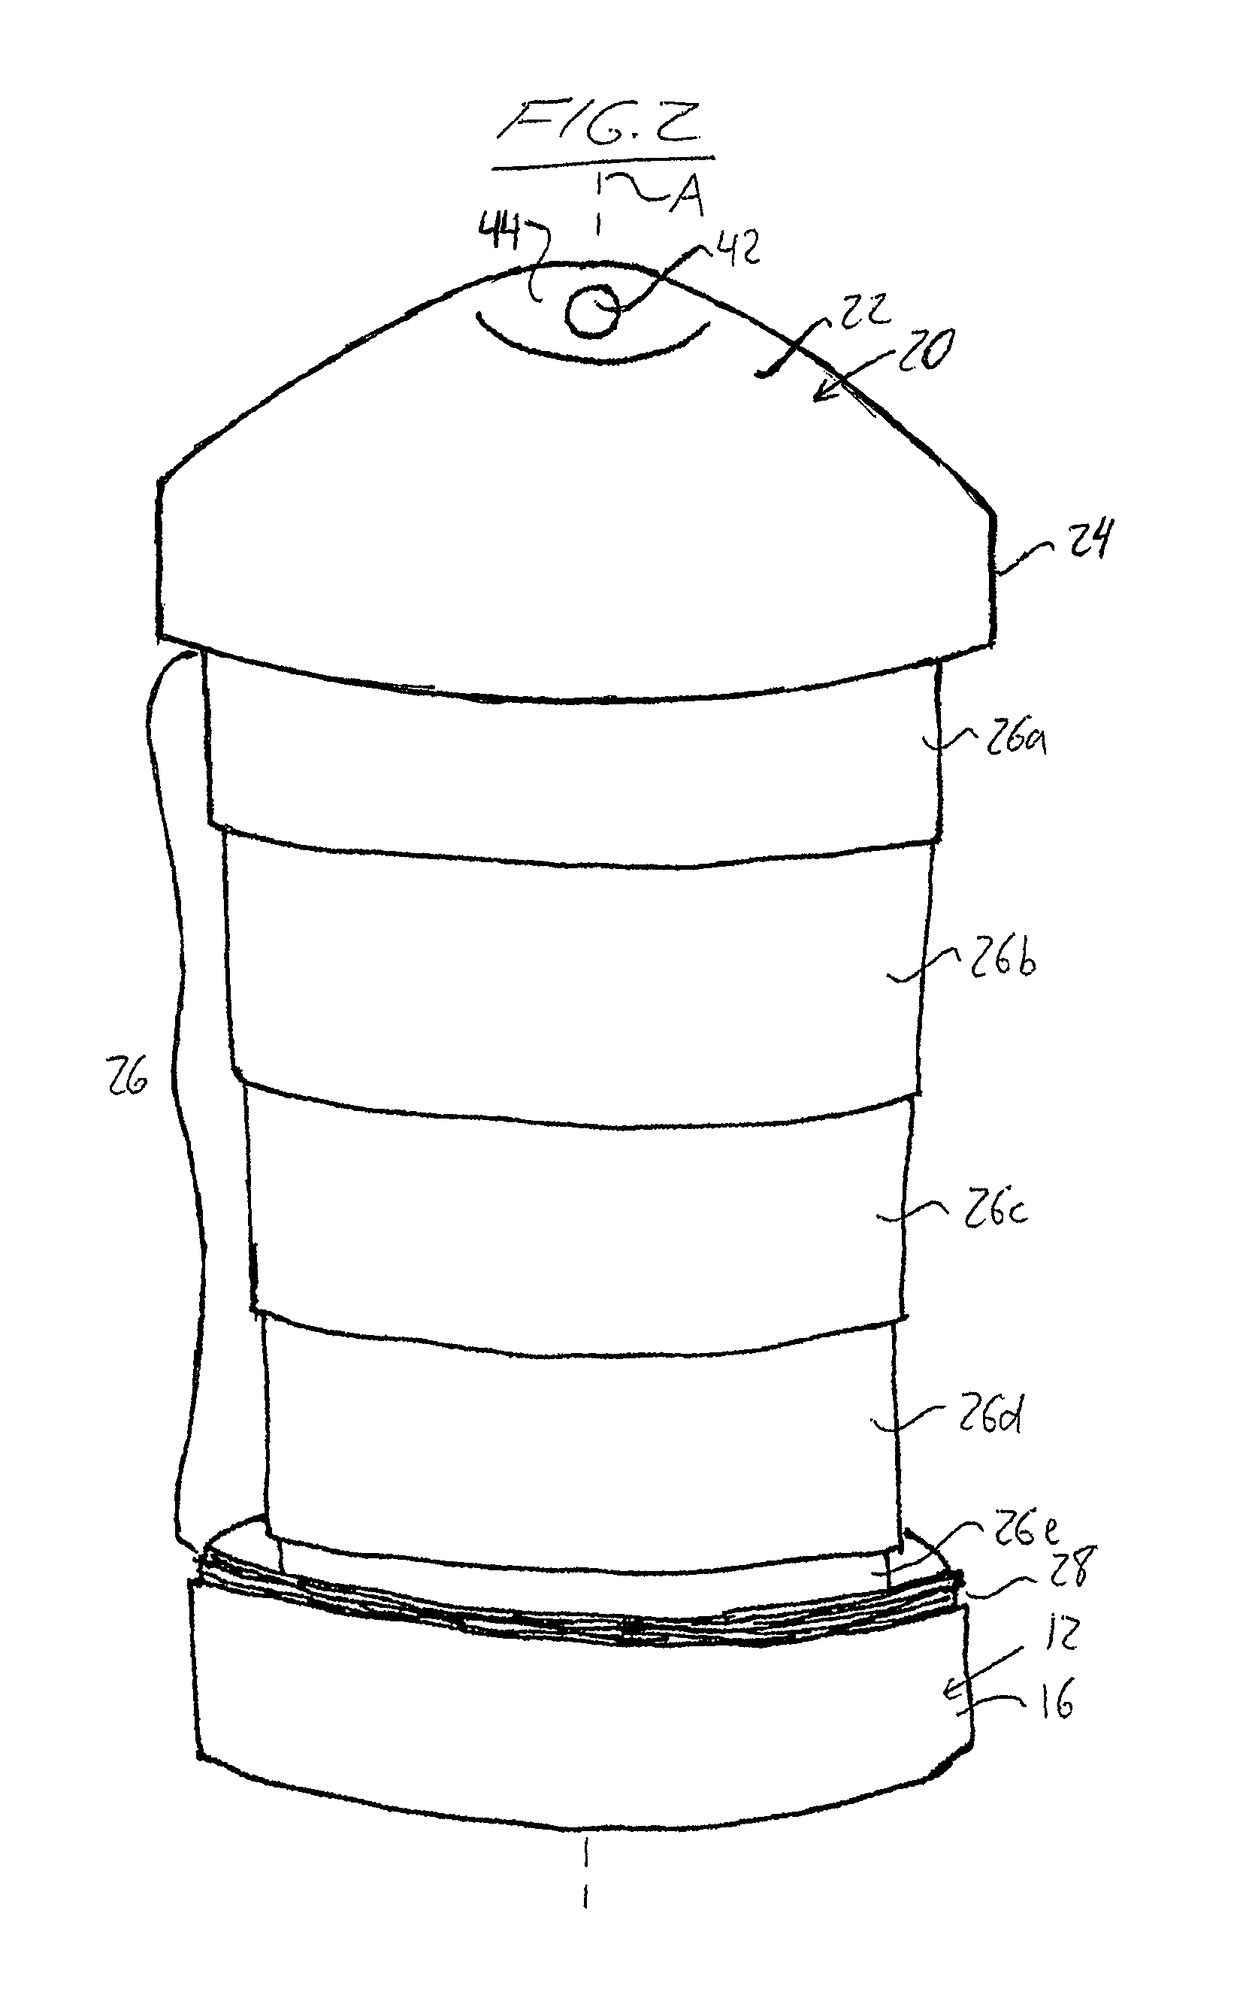 Scent dispensing system with enclosed collapsible scent stick holder and tree stand delivery features